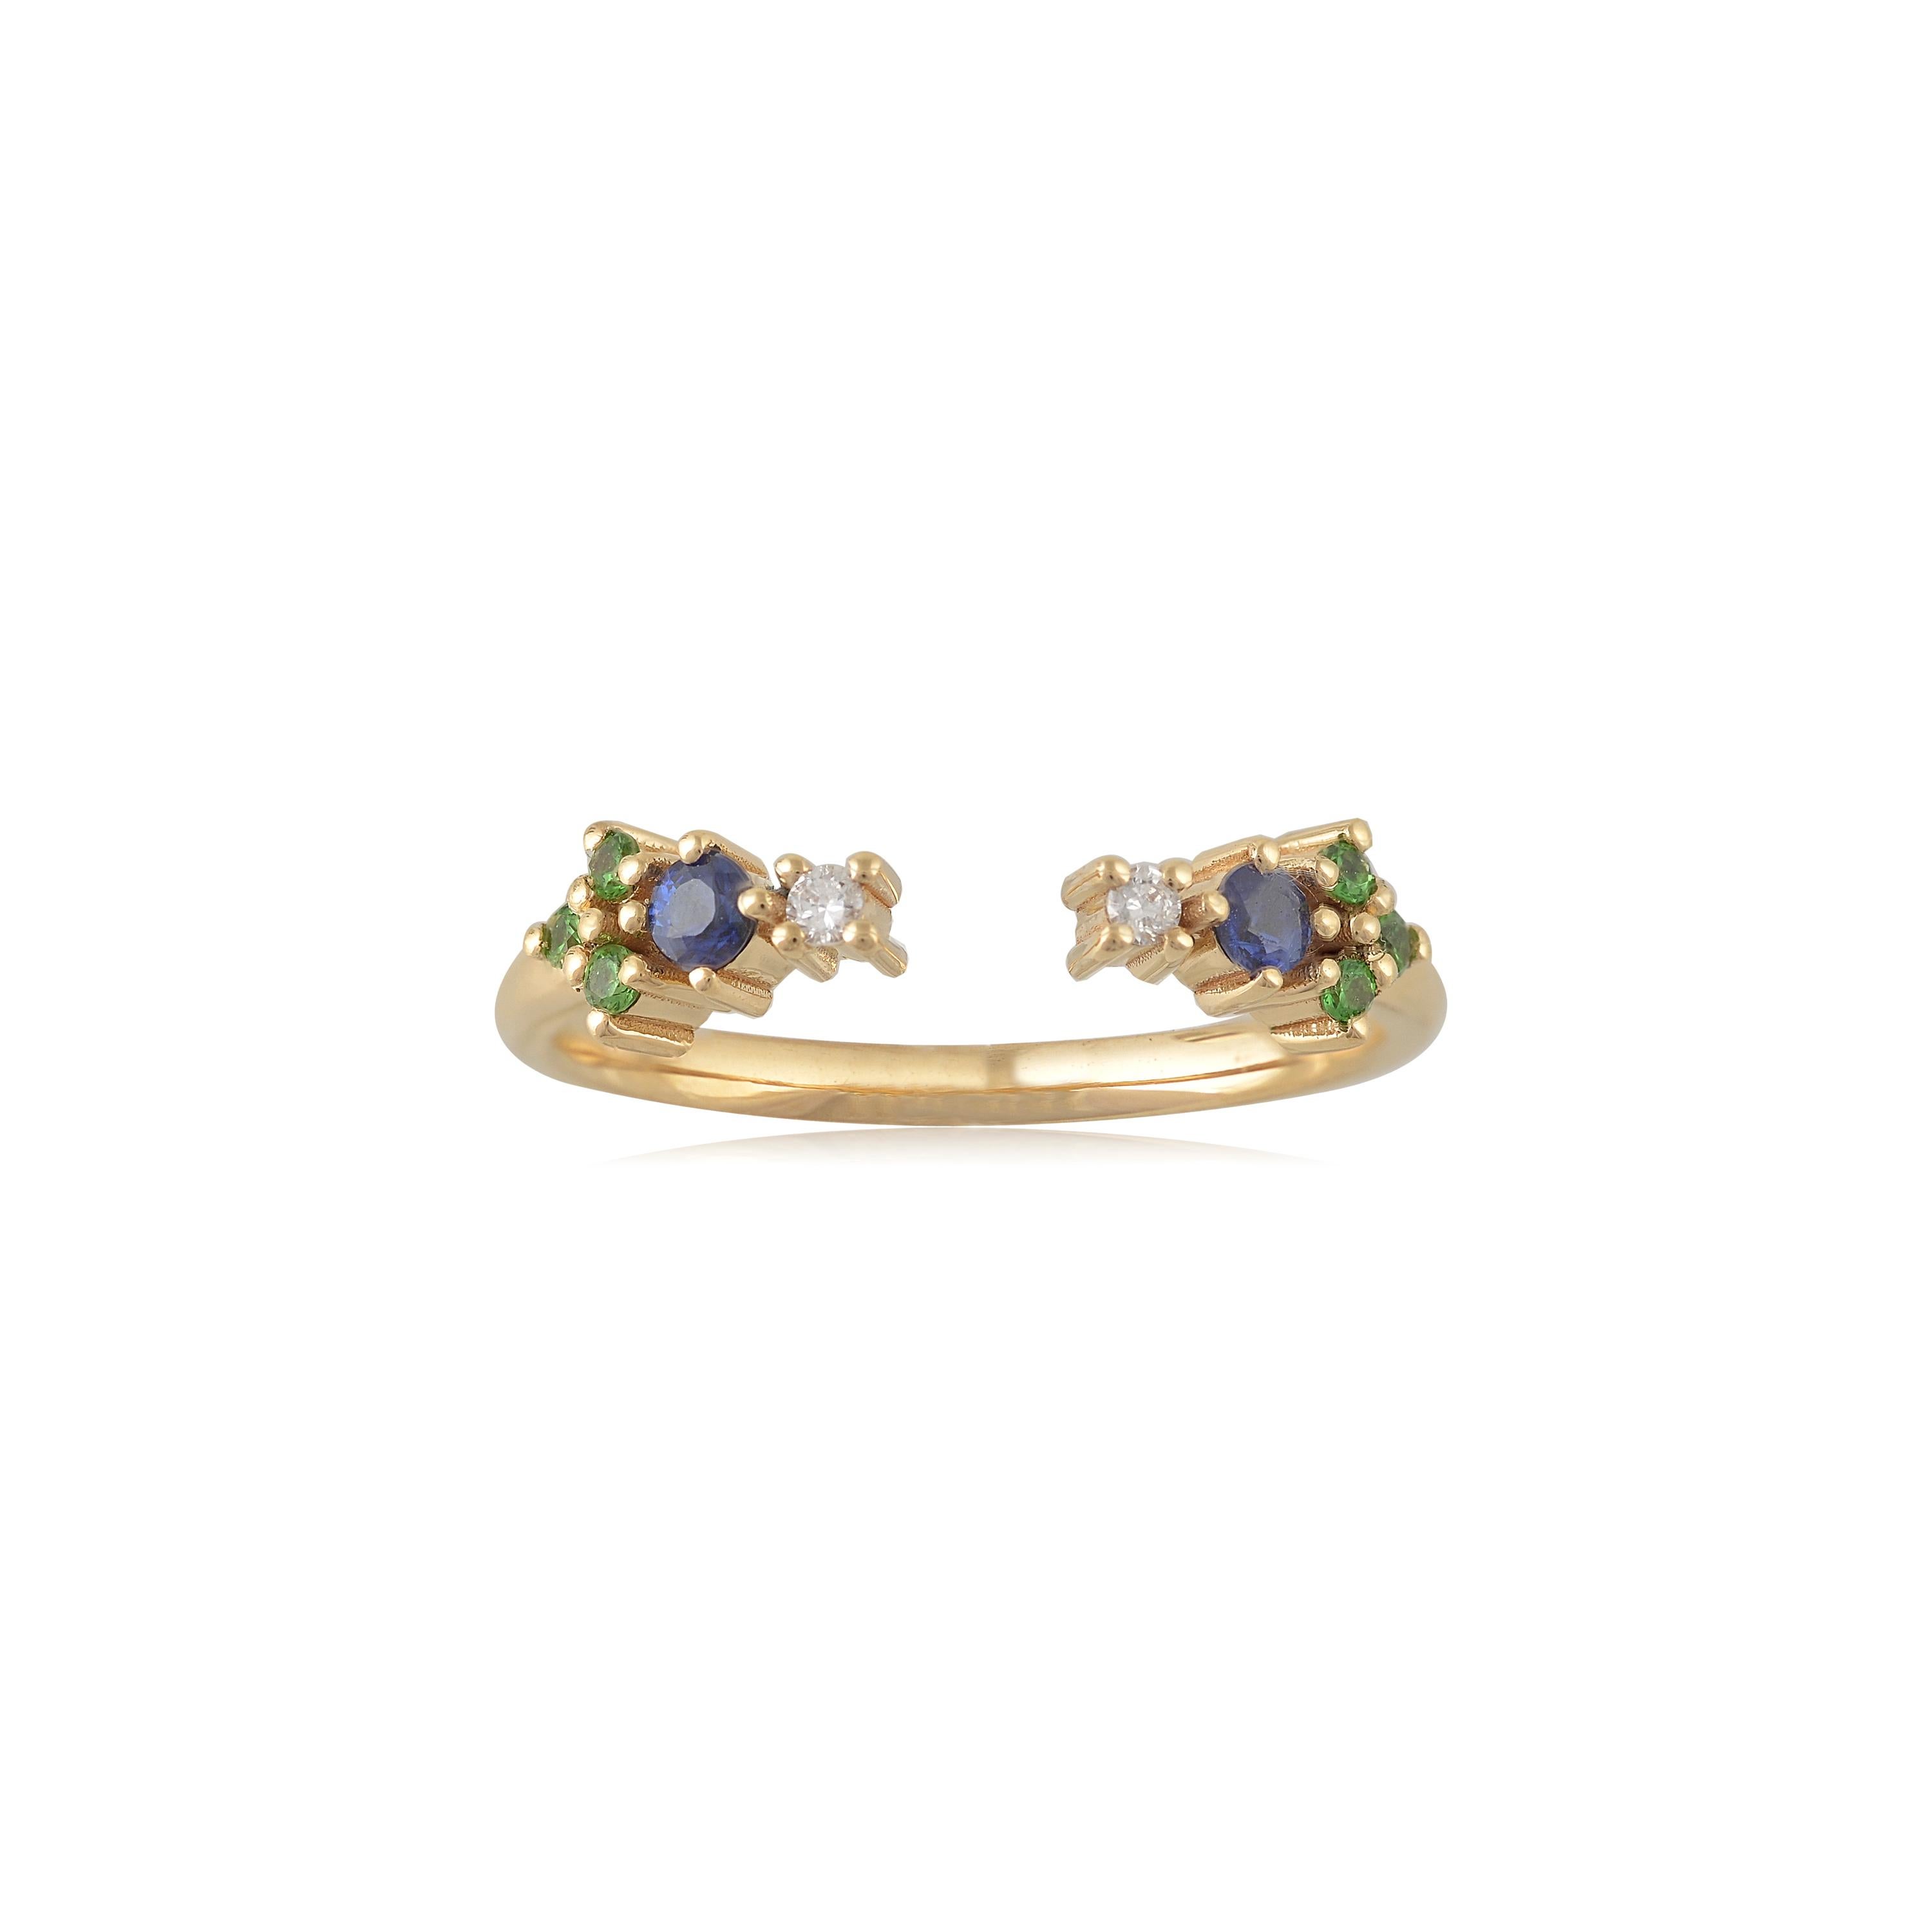 Designer: Alexia Gryllaki
Dimensions: L5x18mm
Ring Size UK I 1/2, US 4 1/2
Weight: approximately 1.9g  
Barcode: OFS025

Multi-stone ring in 18 karat yellow gold with round faceted sapphires approx. 0.09cts, round faceted tsavorites approx. 0.05cts